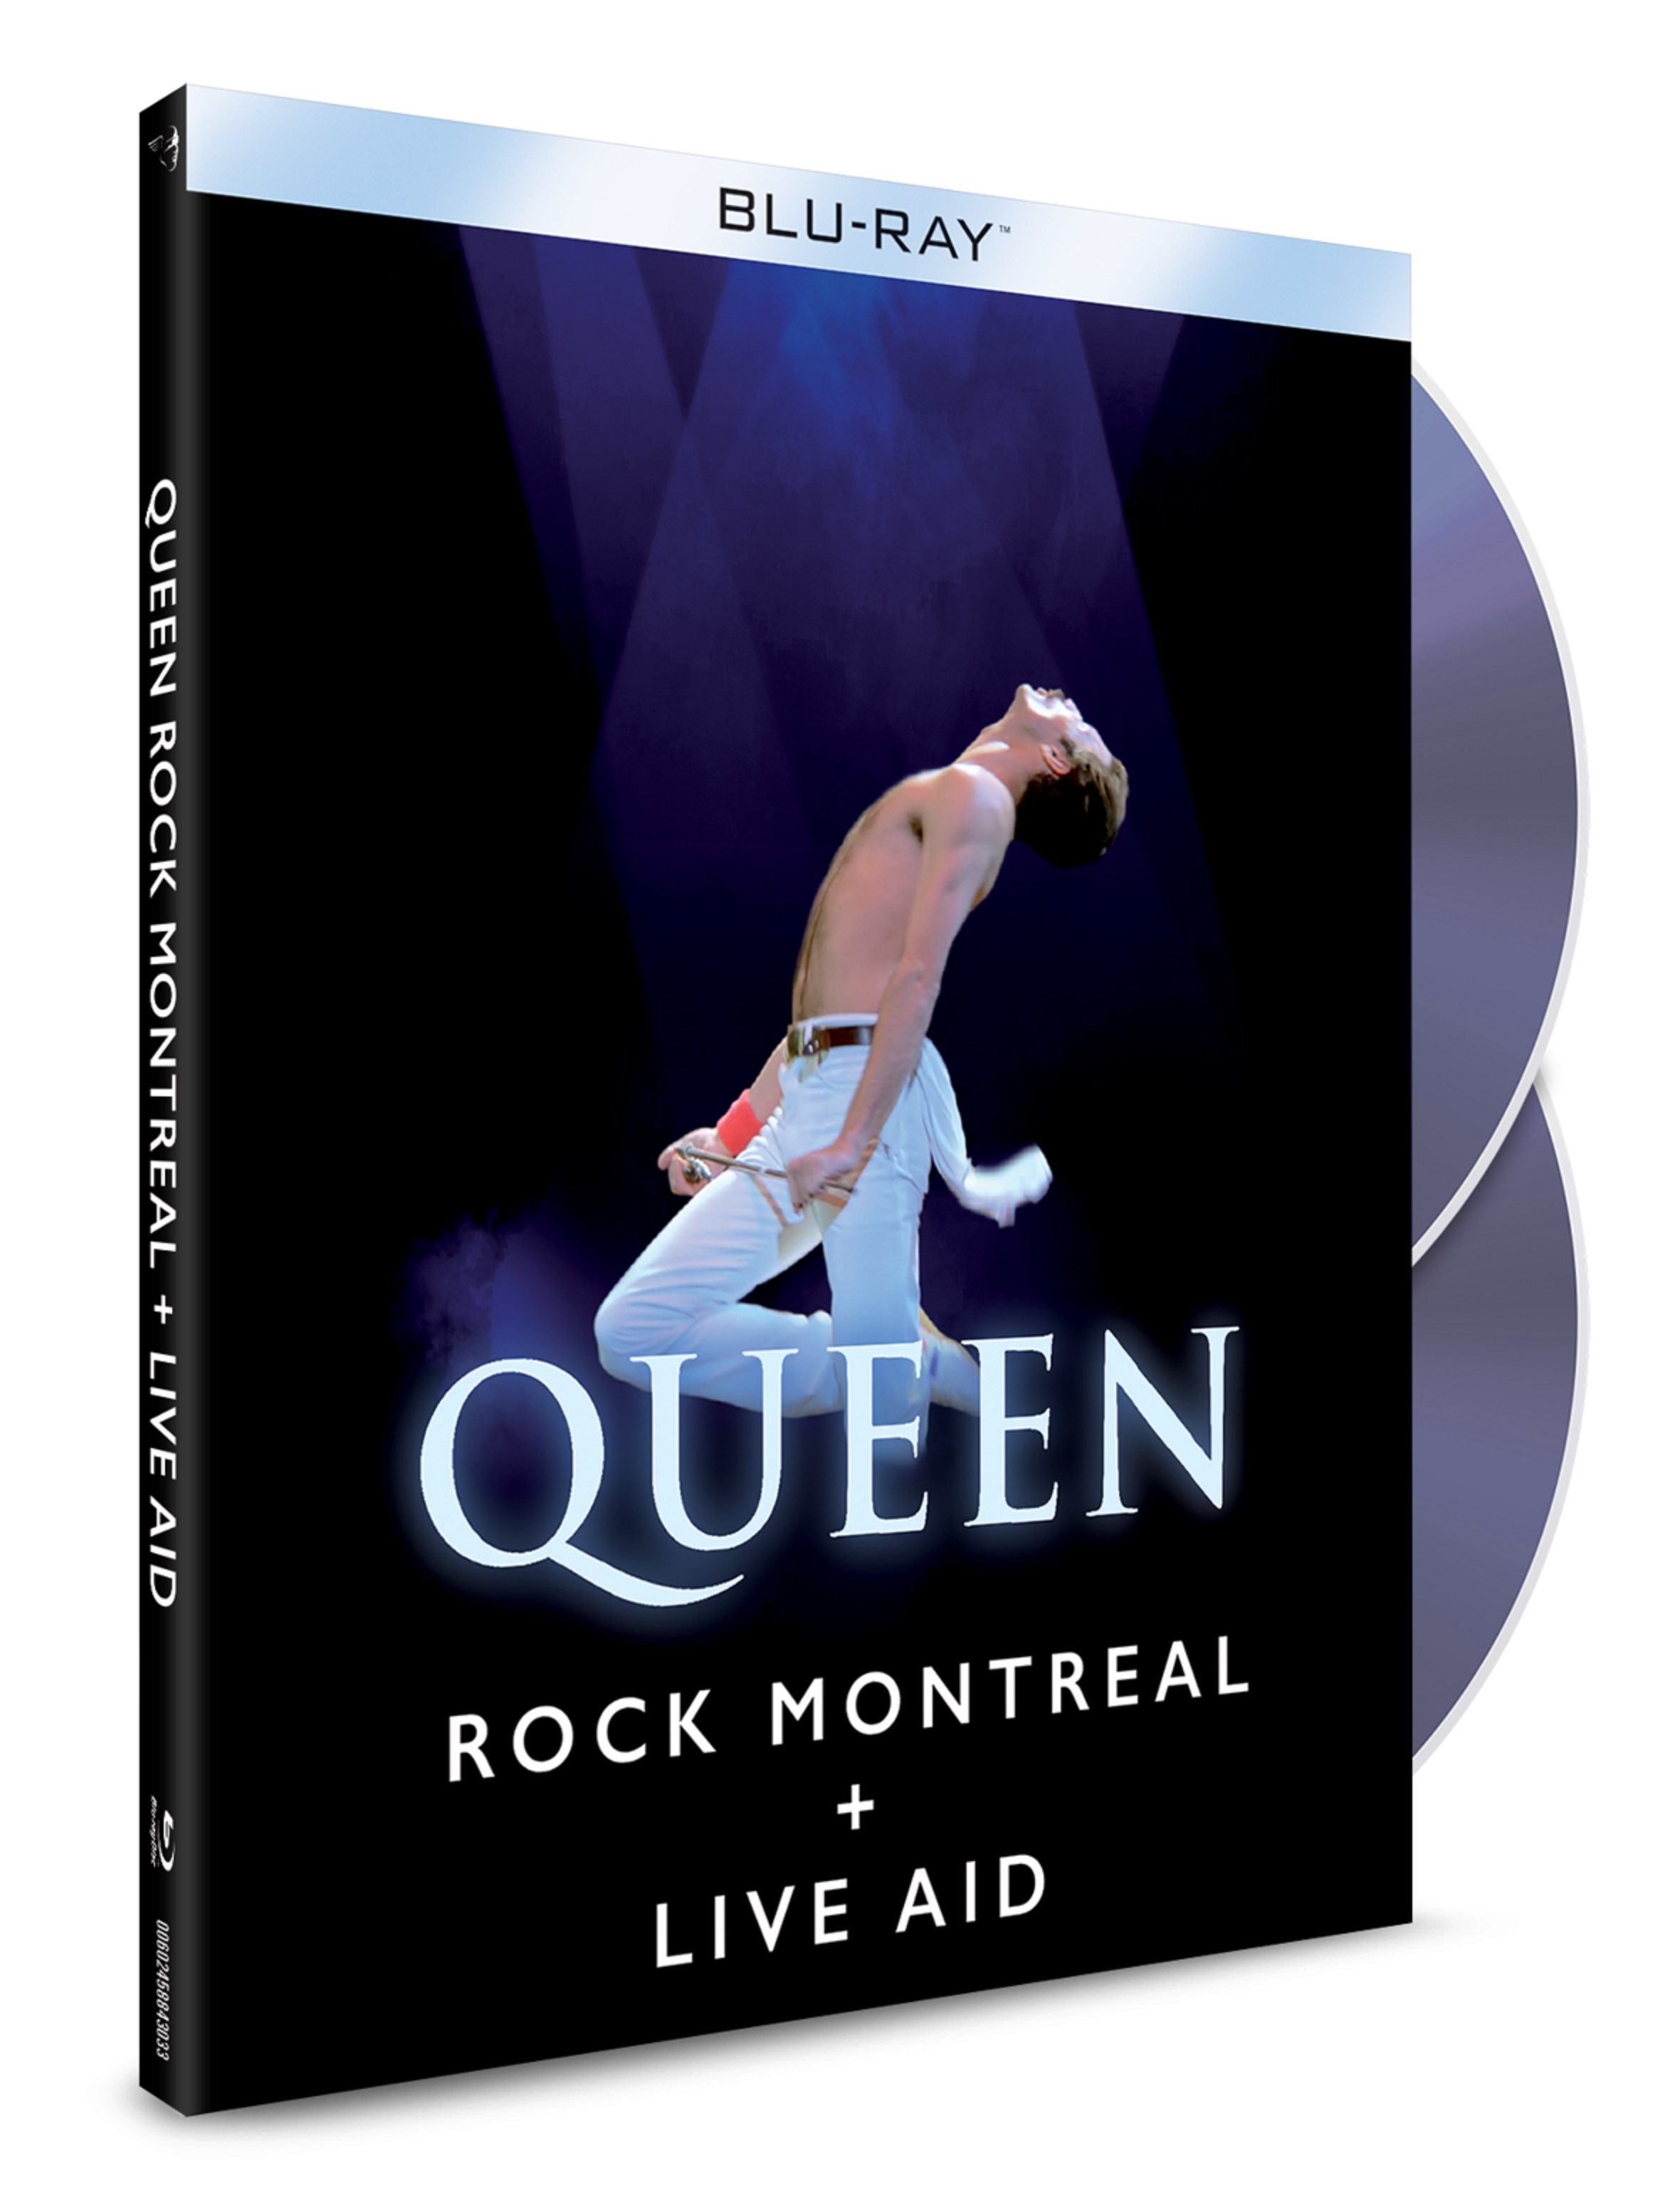 QUEEN TO RELEASE QUEEN ROCK MONTREAL ON MAY 10 ON MULTIPLE FORMATS